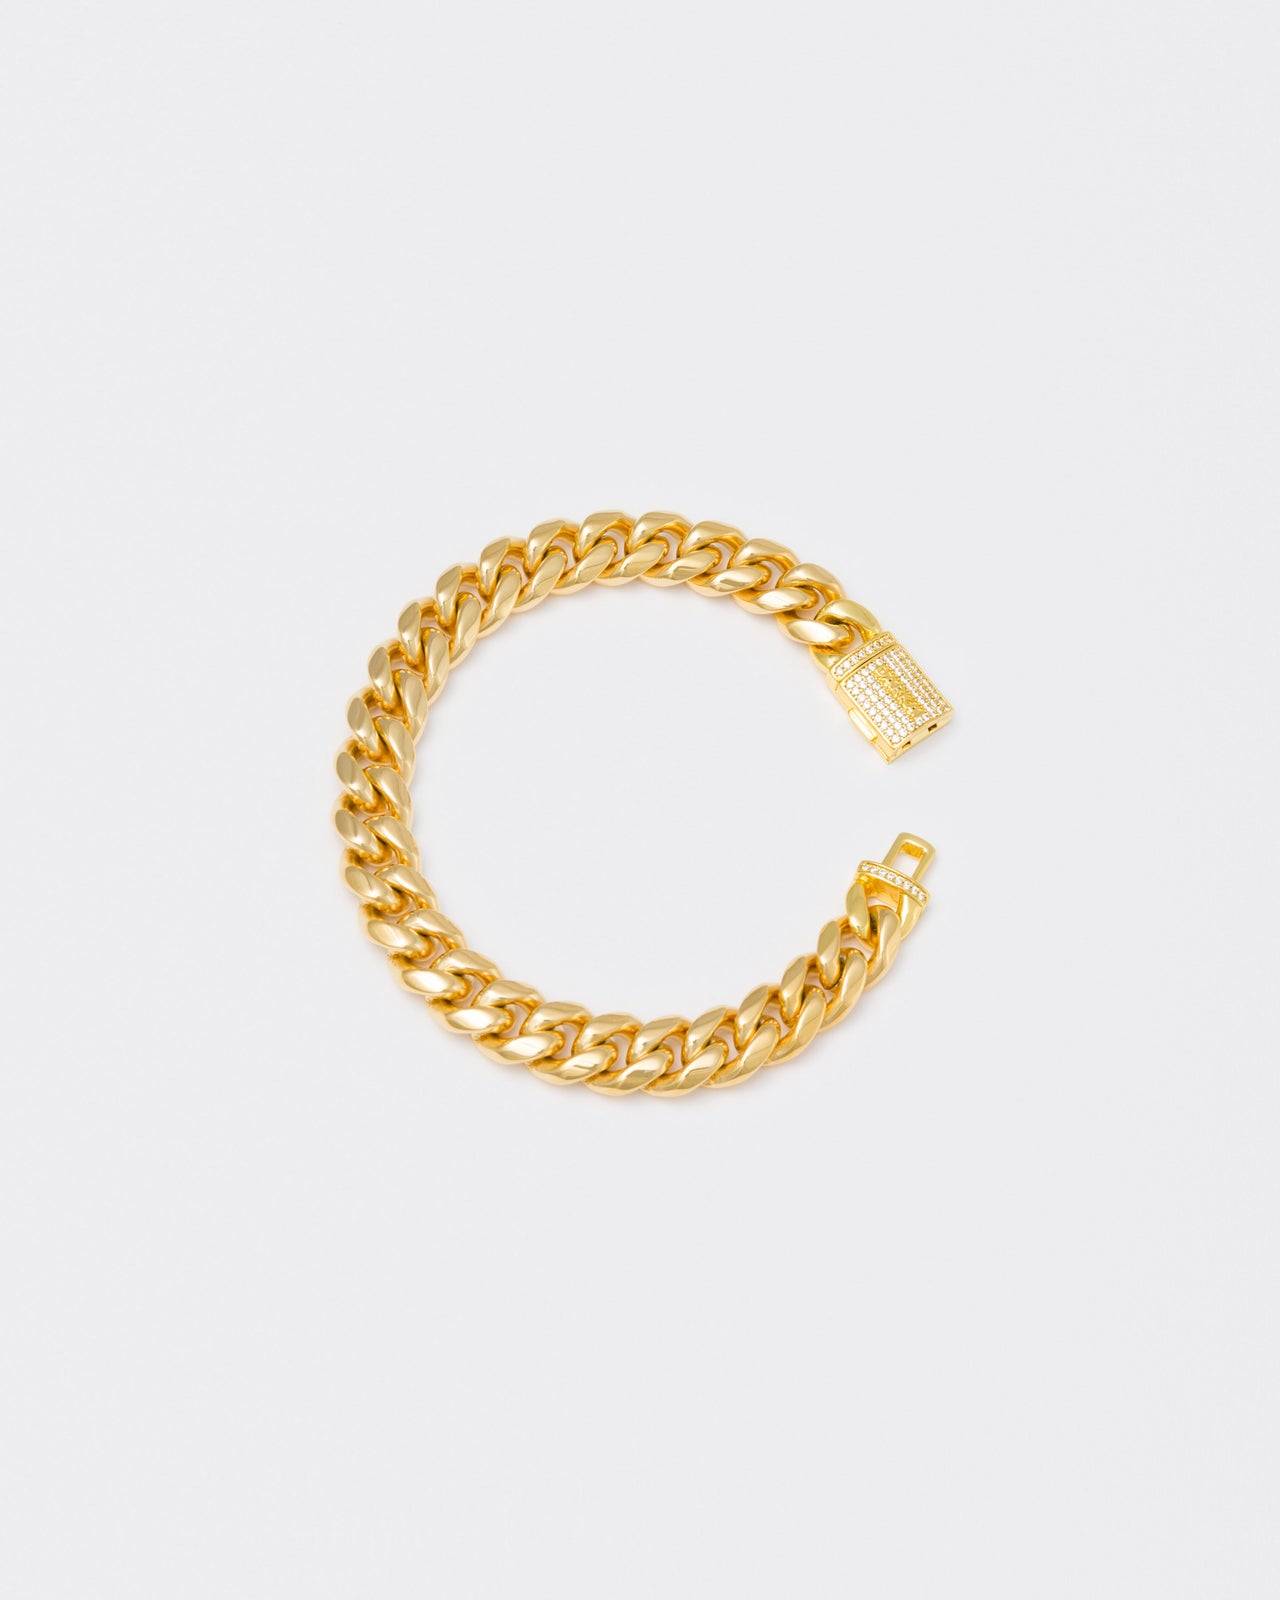 18k yellow gold coated cuban chain bracelet with hand-set micropavé stones in white